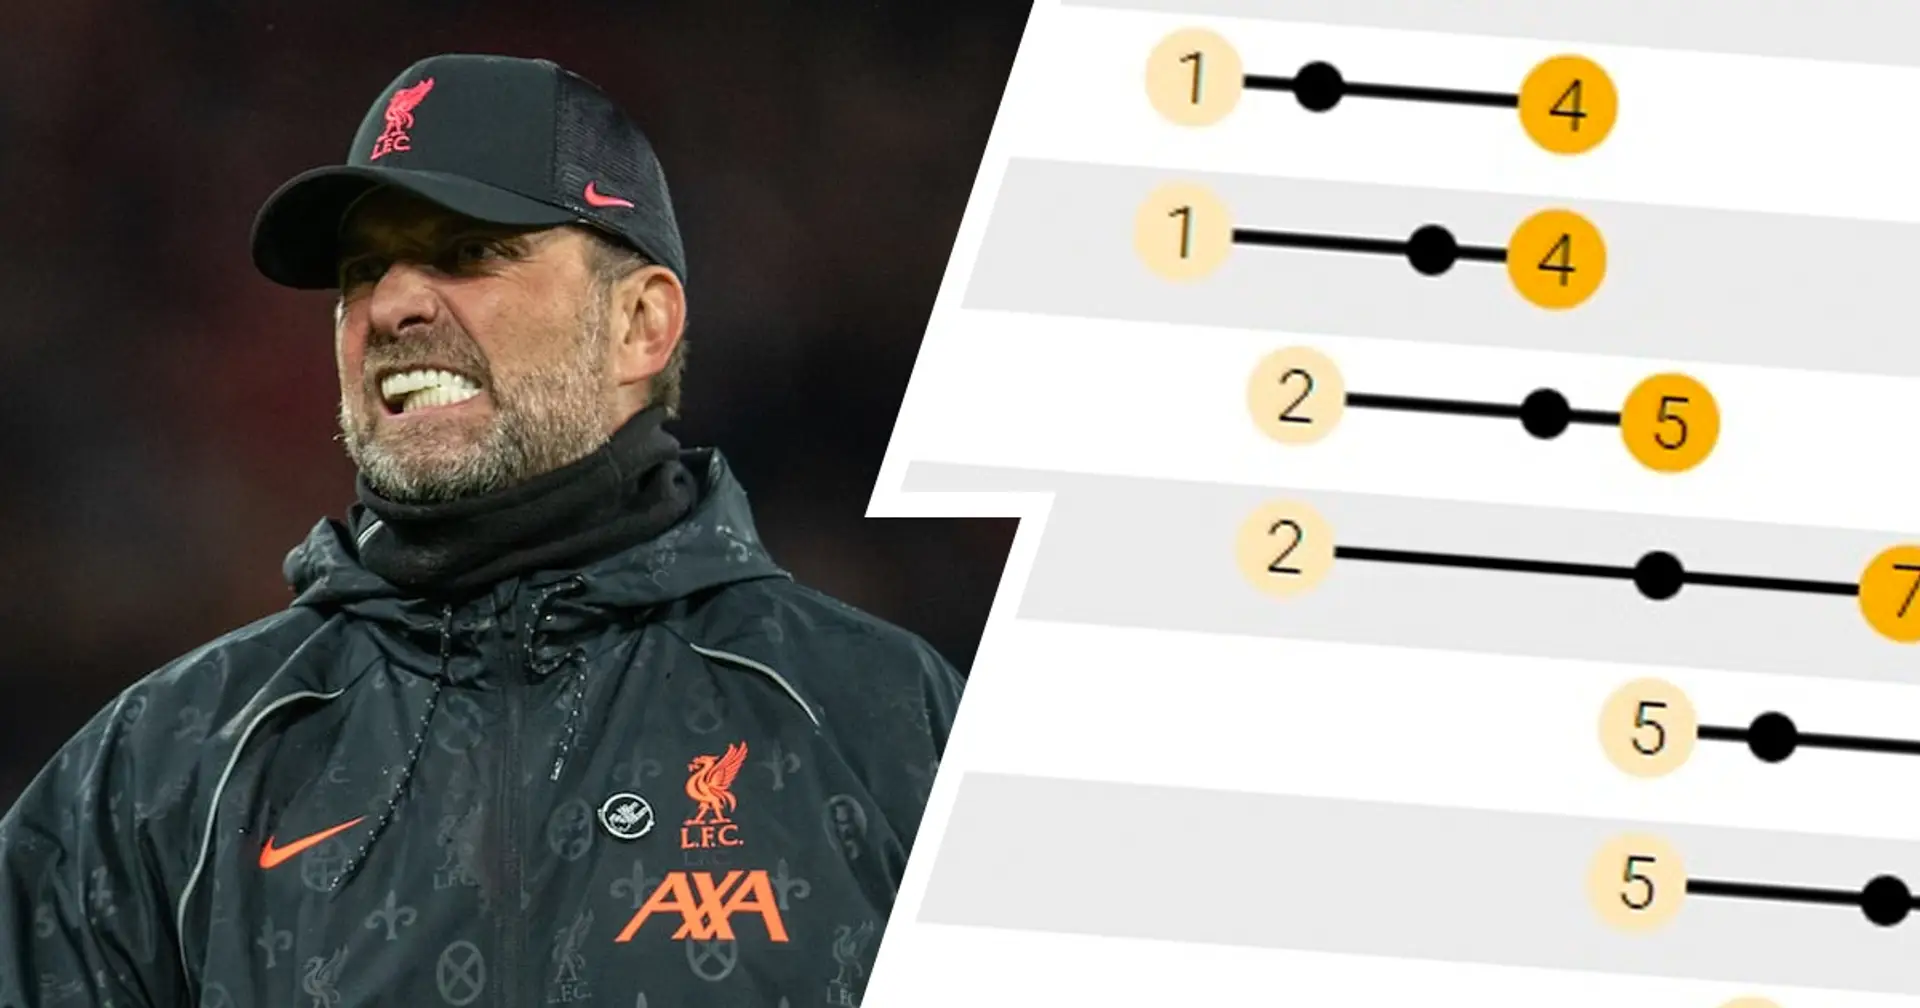 Liverpool could jump up to 2nd - or drop to 5th: how Premier League table can change over weekend